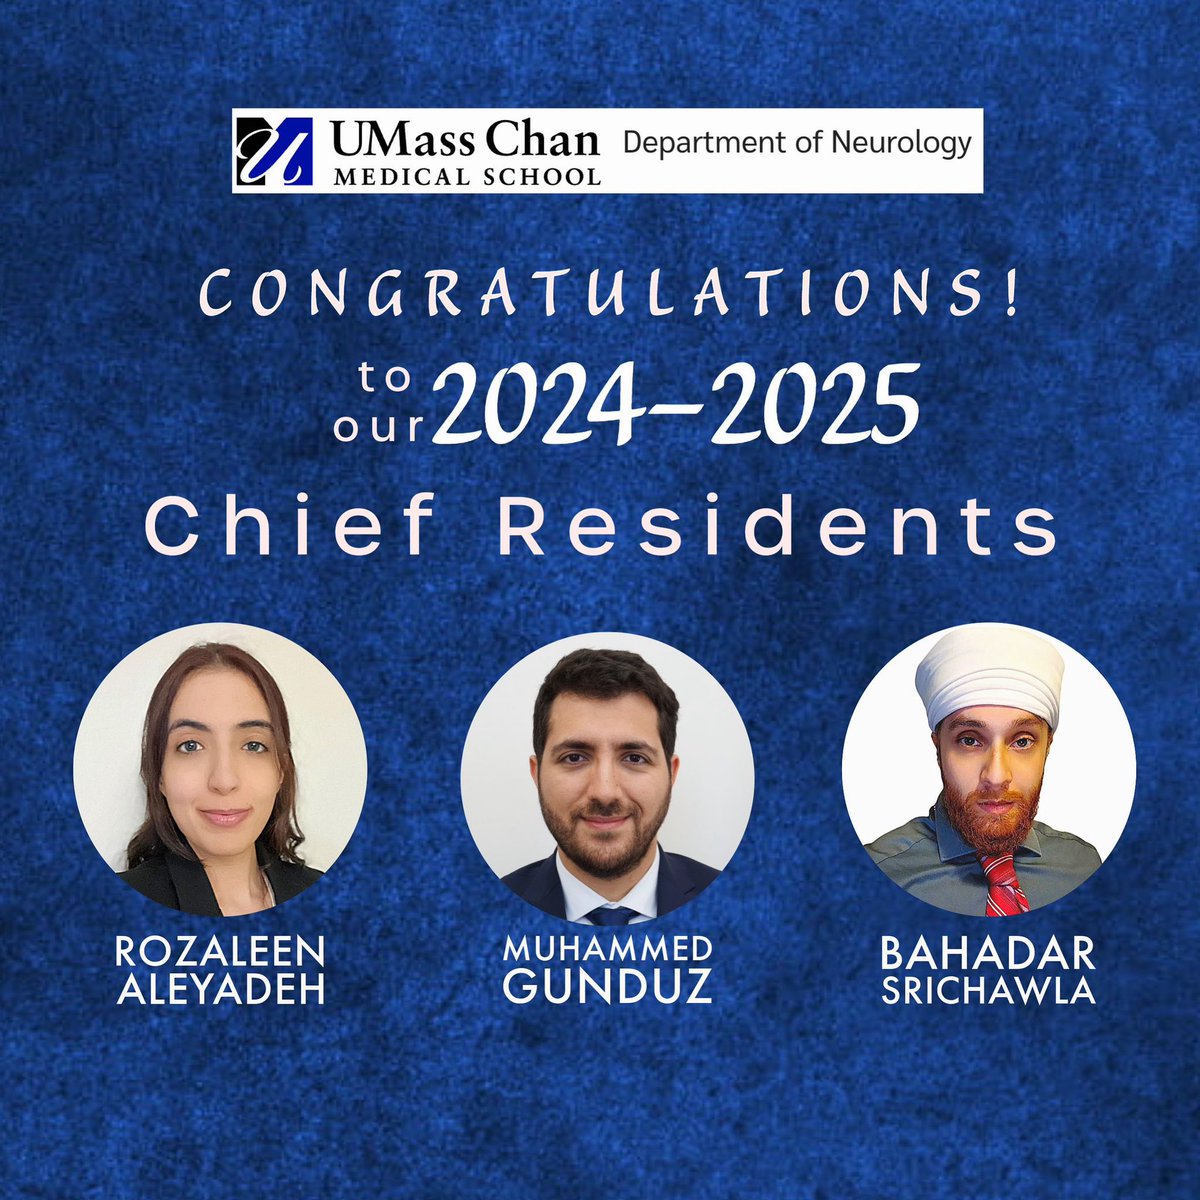 Thrilled to announce our upcoming Chiefs for the 2024-2025 academic year! Congratulations to Rozaleen Aleyadeh, Muhammed Gunduz and Bahadar Srichawla! #Neurology #Neurotwitter #Residency #Match2024 #NMatch #MedEd #Medicine